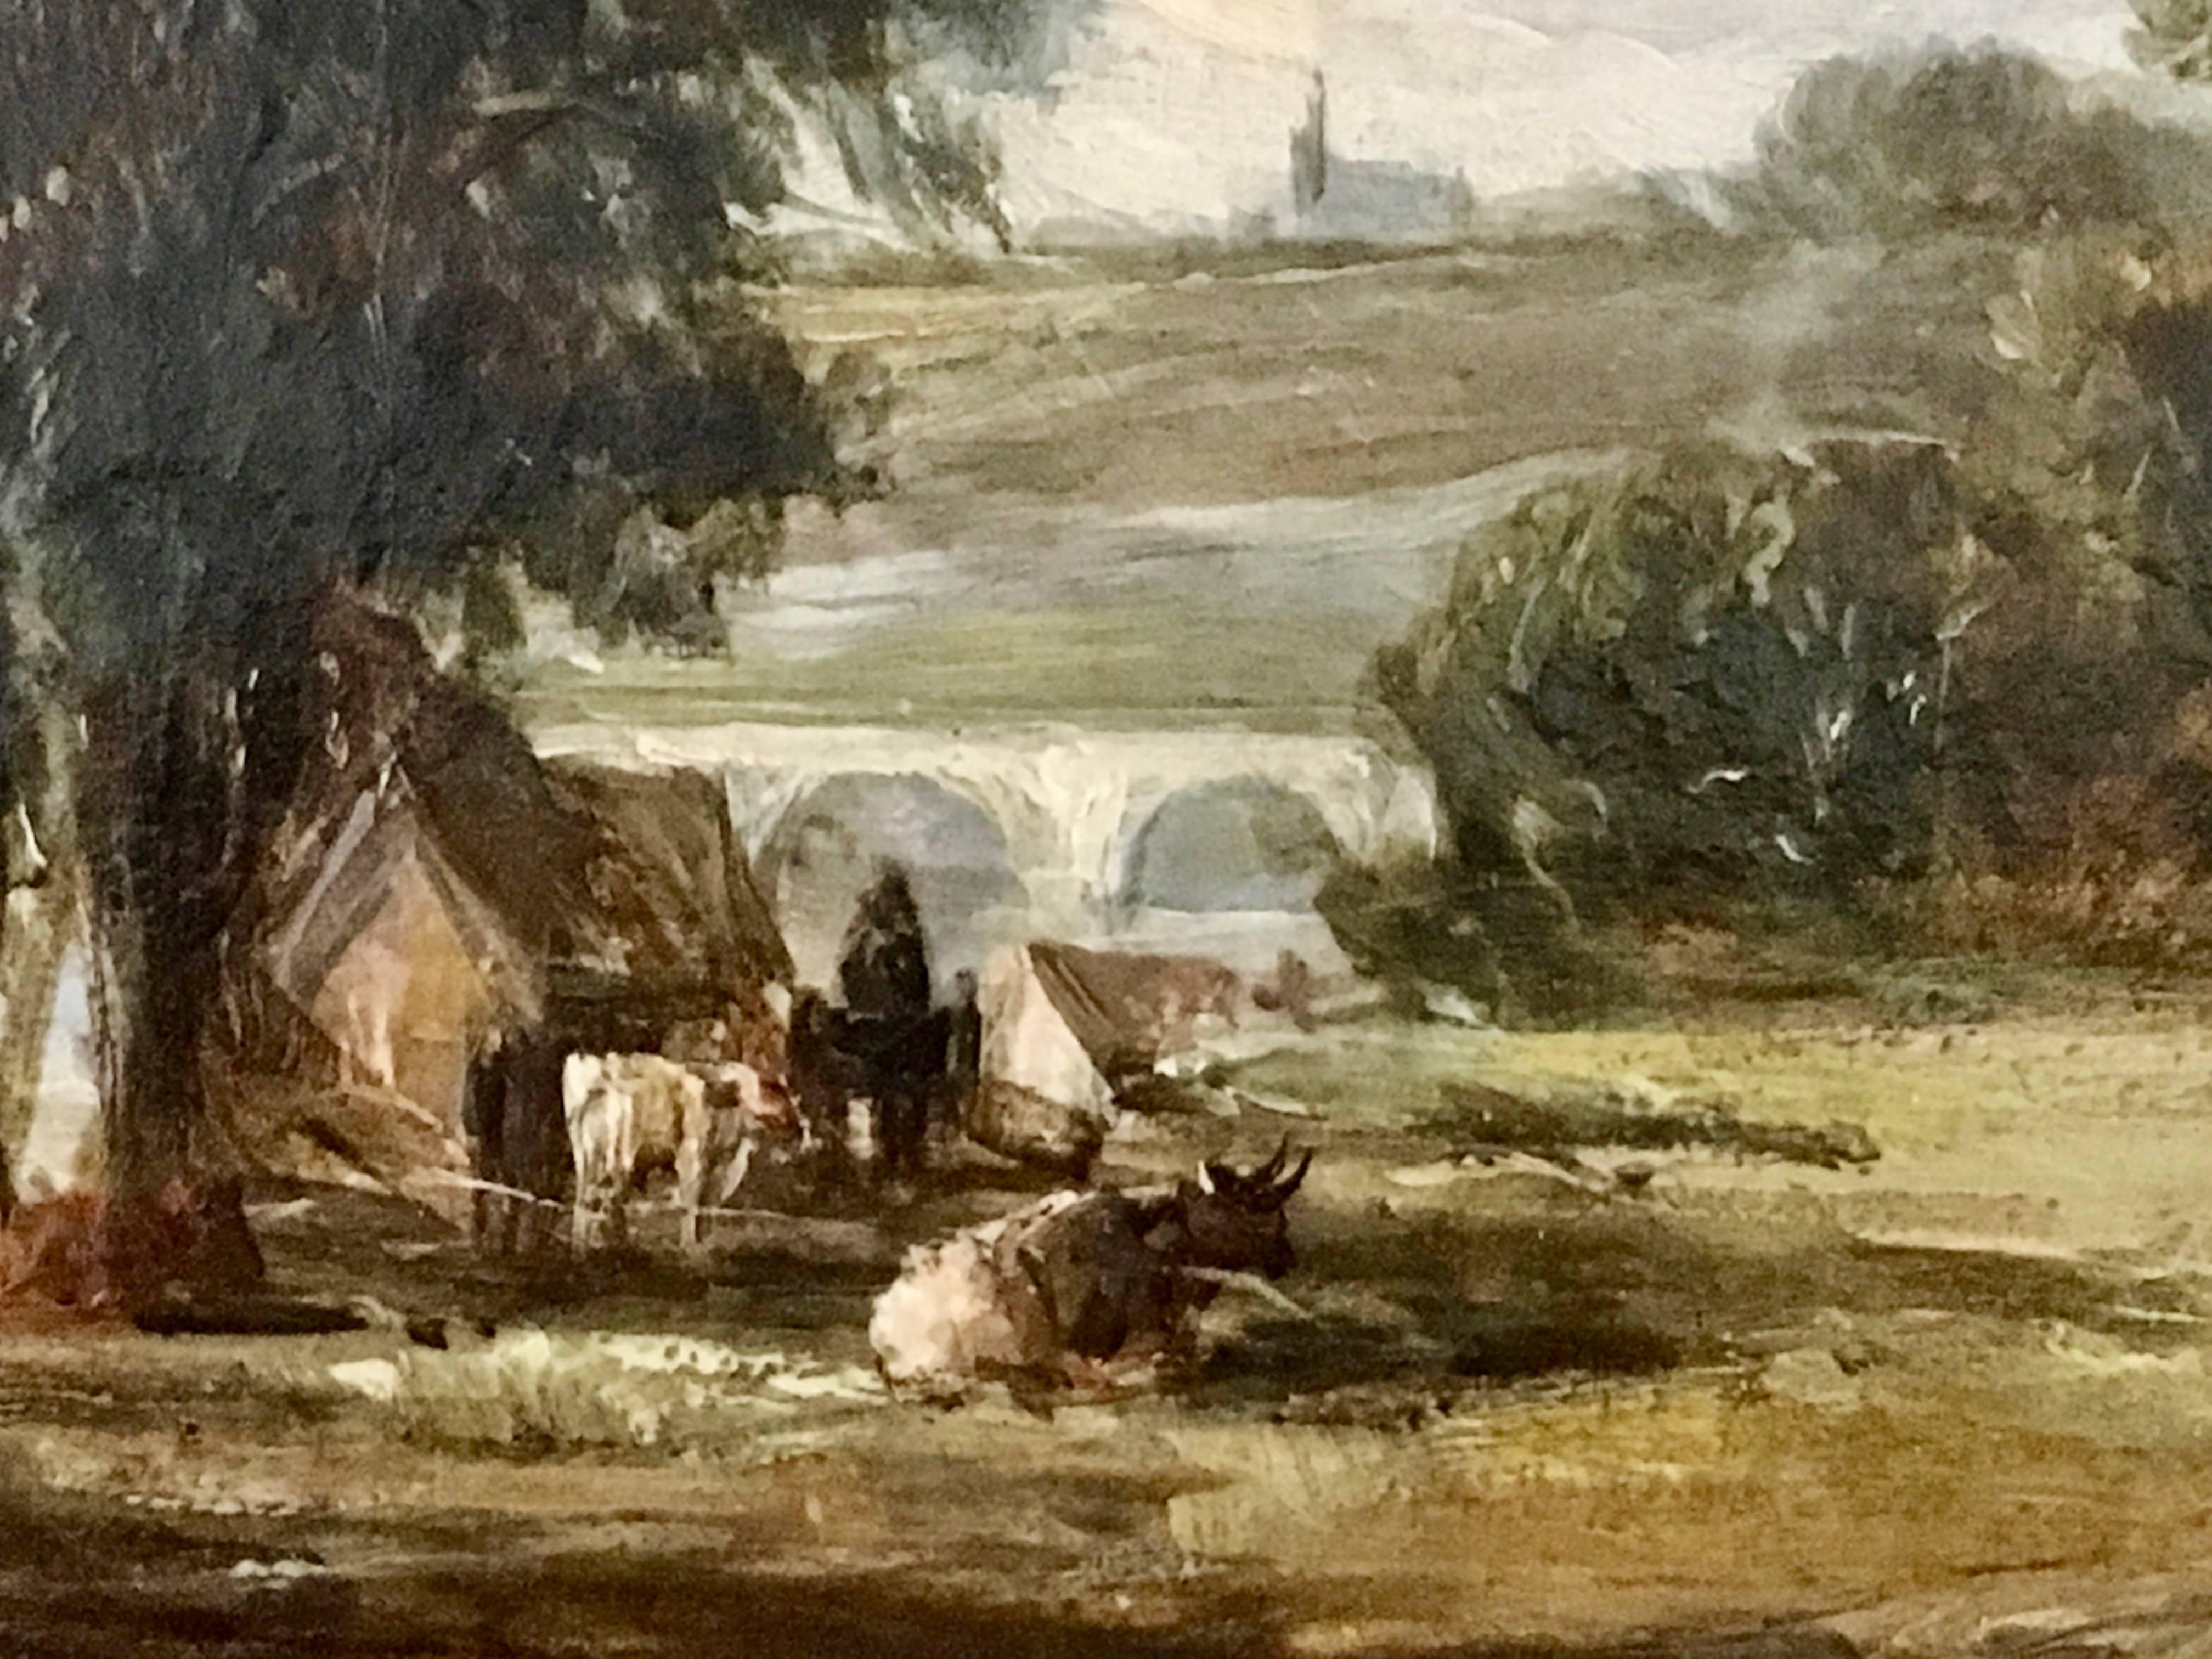 Extensive Victorian 19th century English River Landscape with people with a tent - Brown Landscape Painting by Alfred Vickers